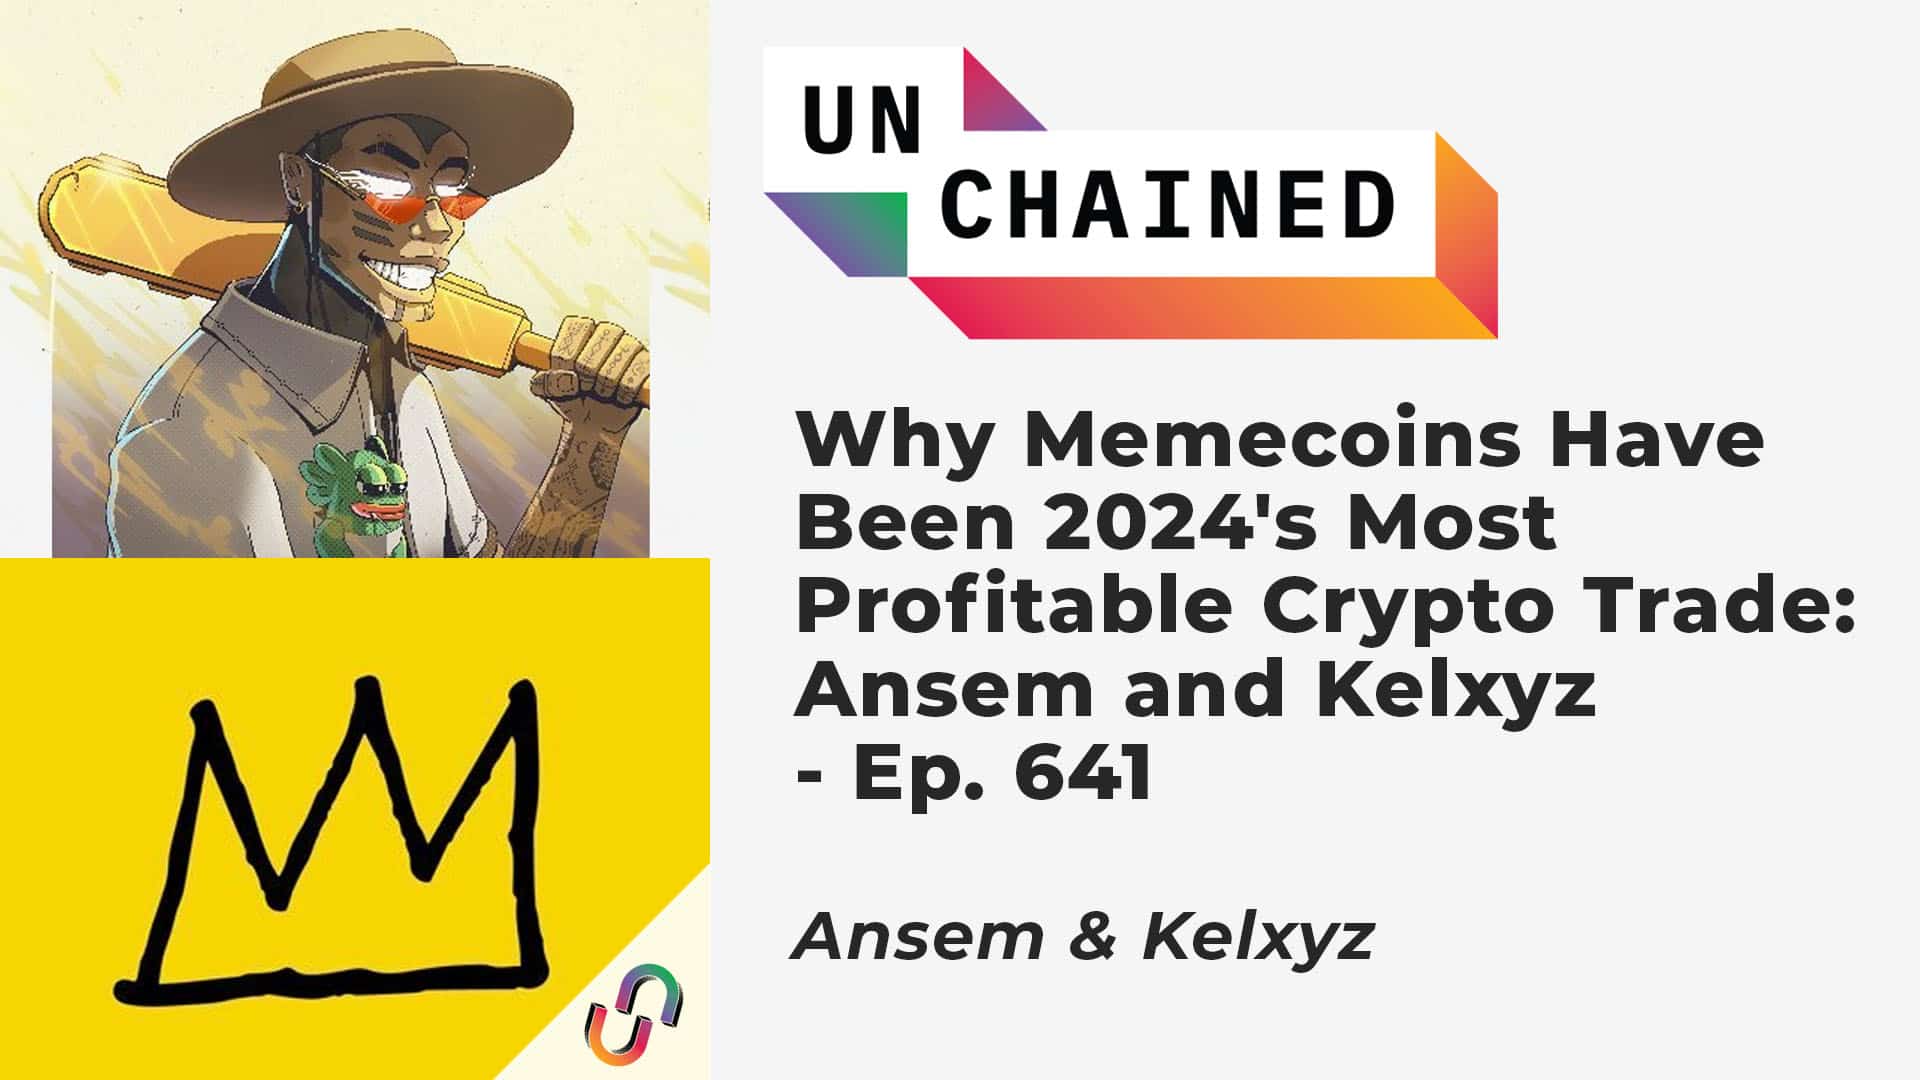 Why Memecoins Have Been 2024's Most Profitable Crypto Trade: Ansem and Kelxyz - Ep. 641